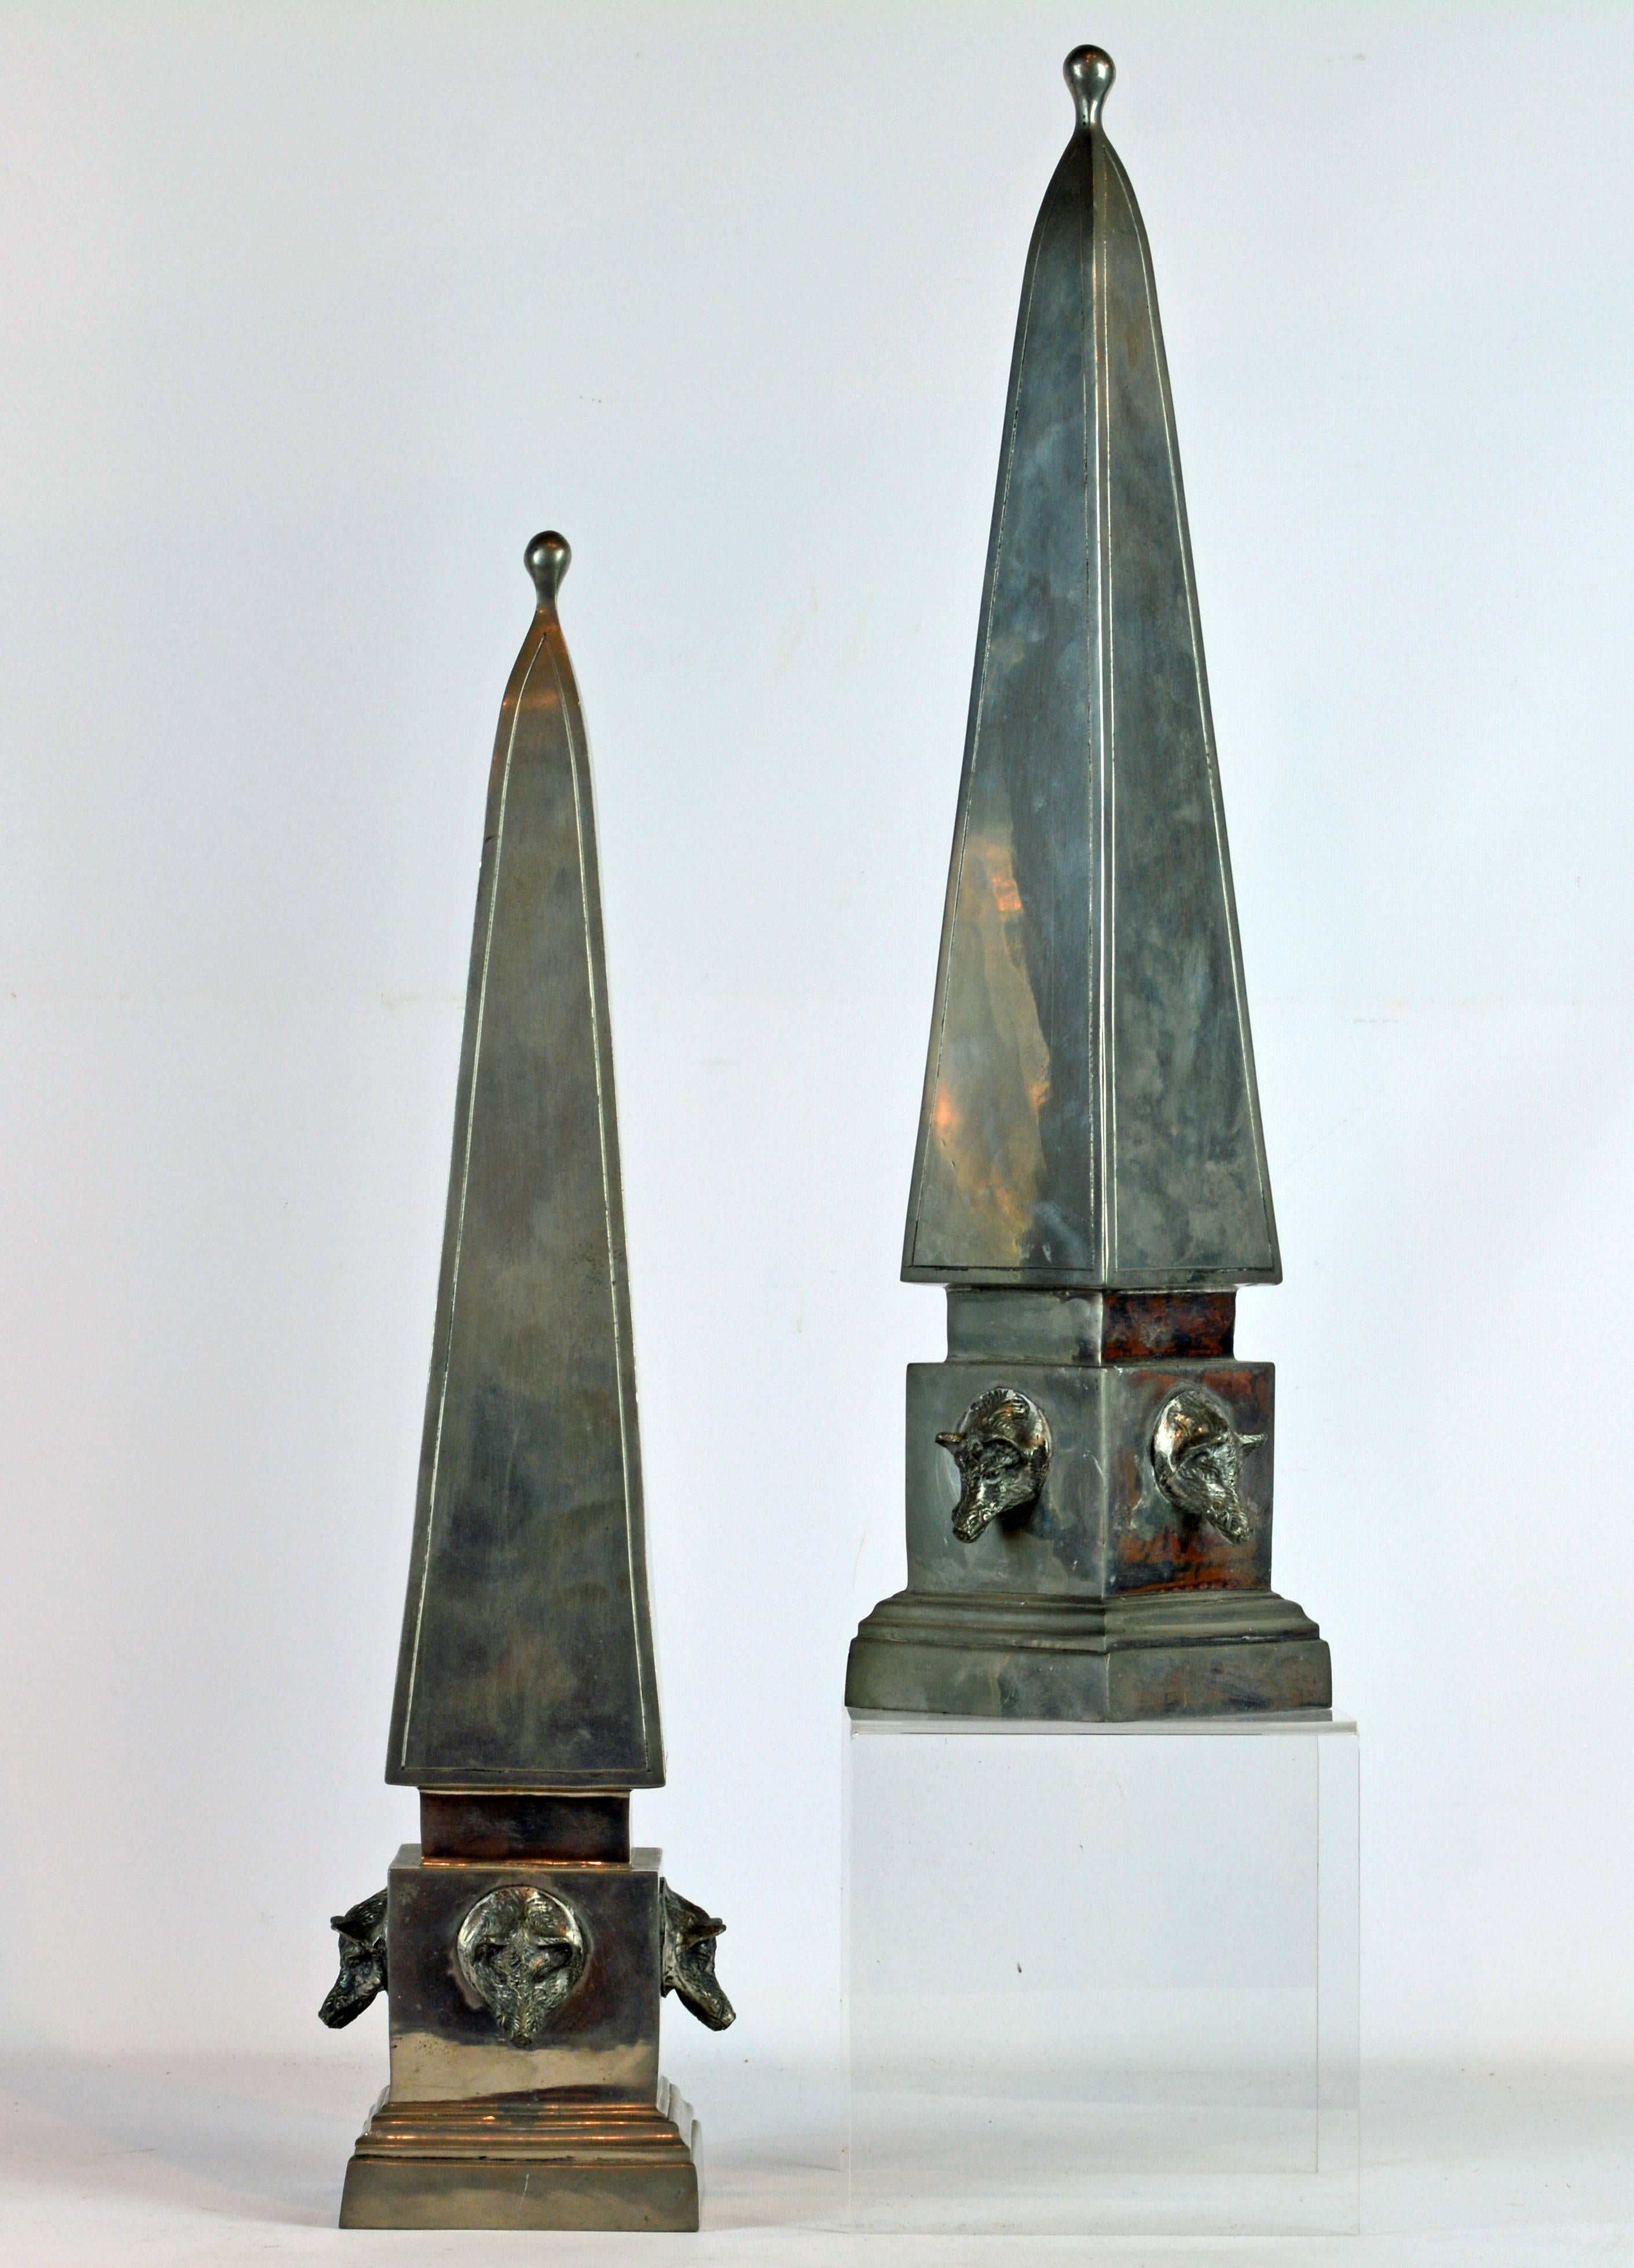 Standing 20 inches tall these unique hunting themed pewter obelisks model in the neoclassical style feature beautiful craftsmanship and detail. Each base is mounted with four boar's heads adding a sculptural quality to their appearance. The obelisks